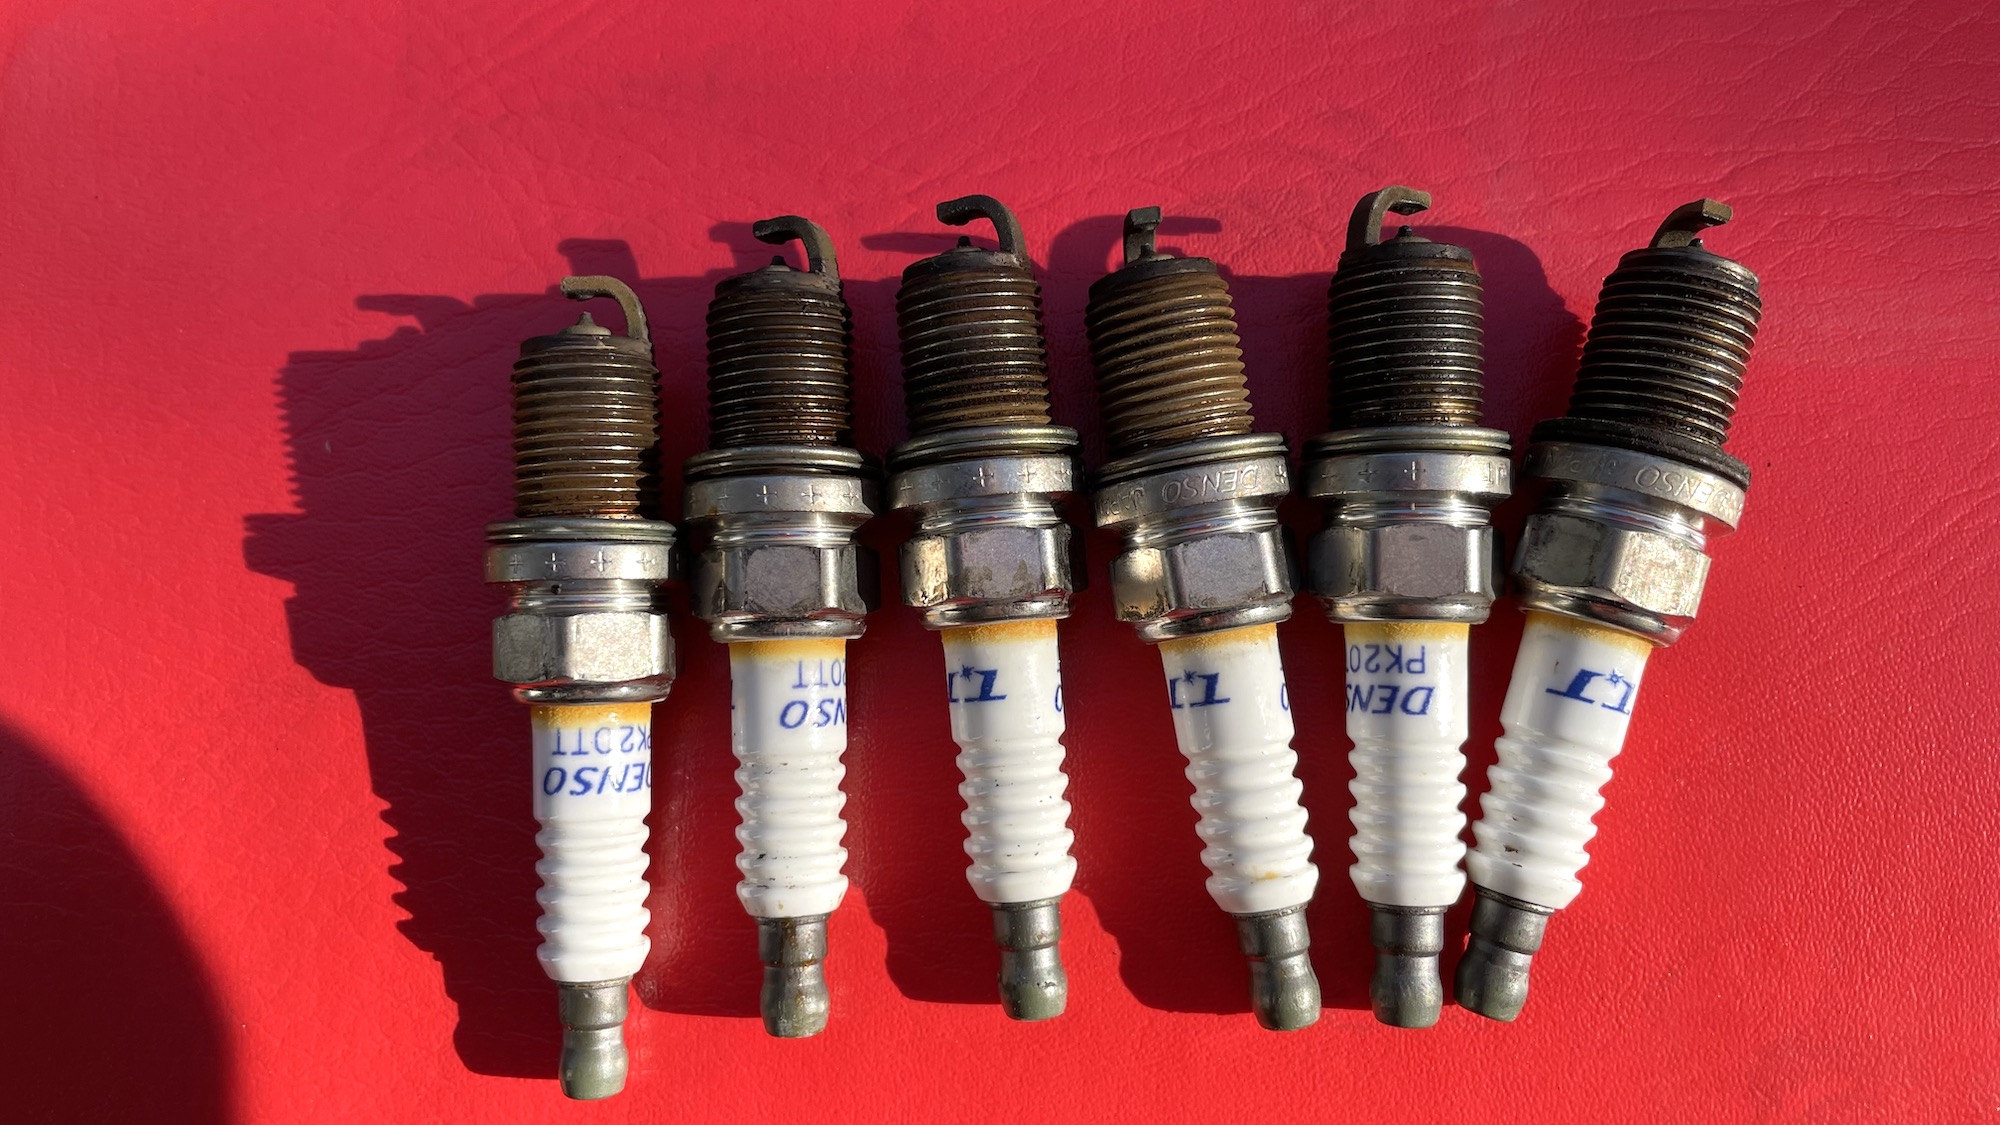 How to test spark plugs